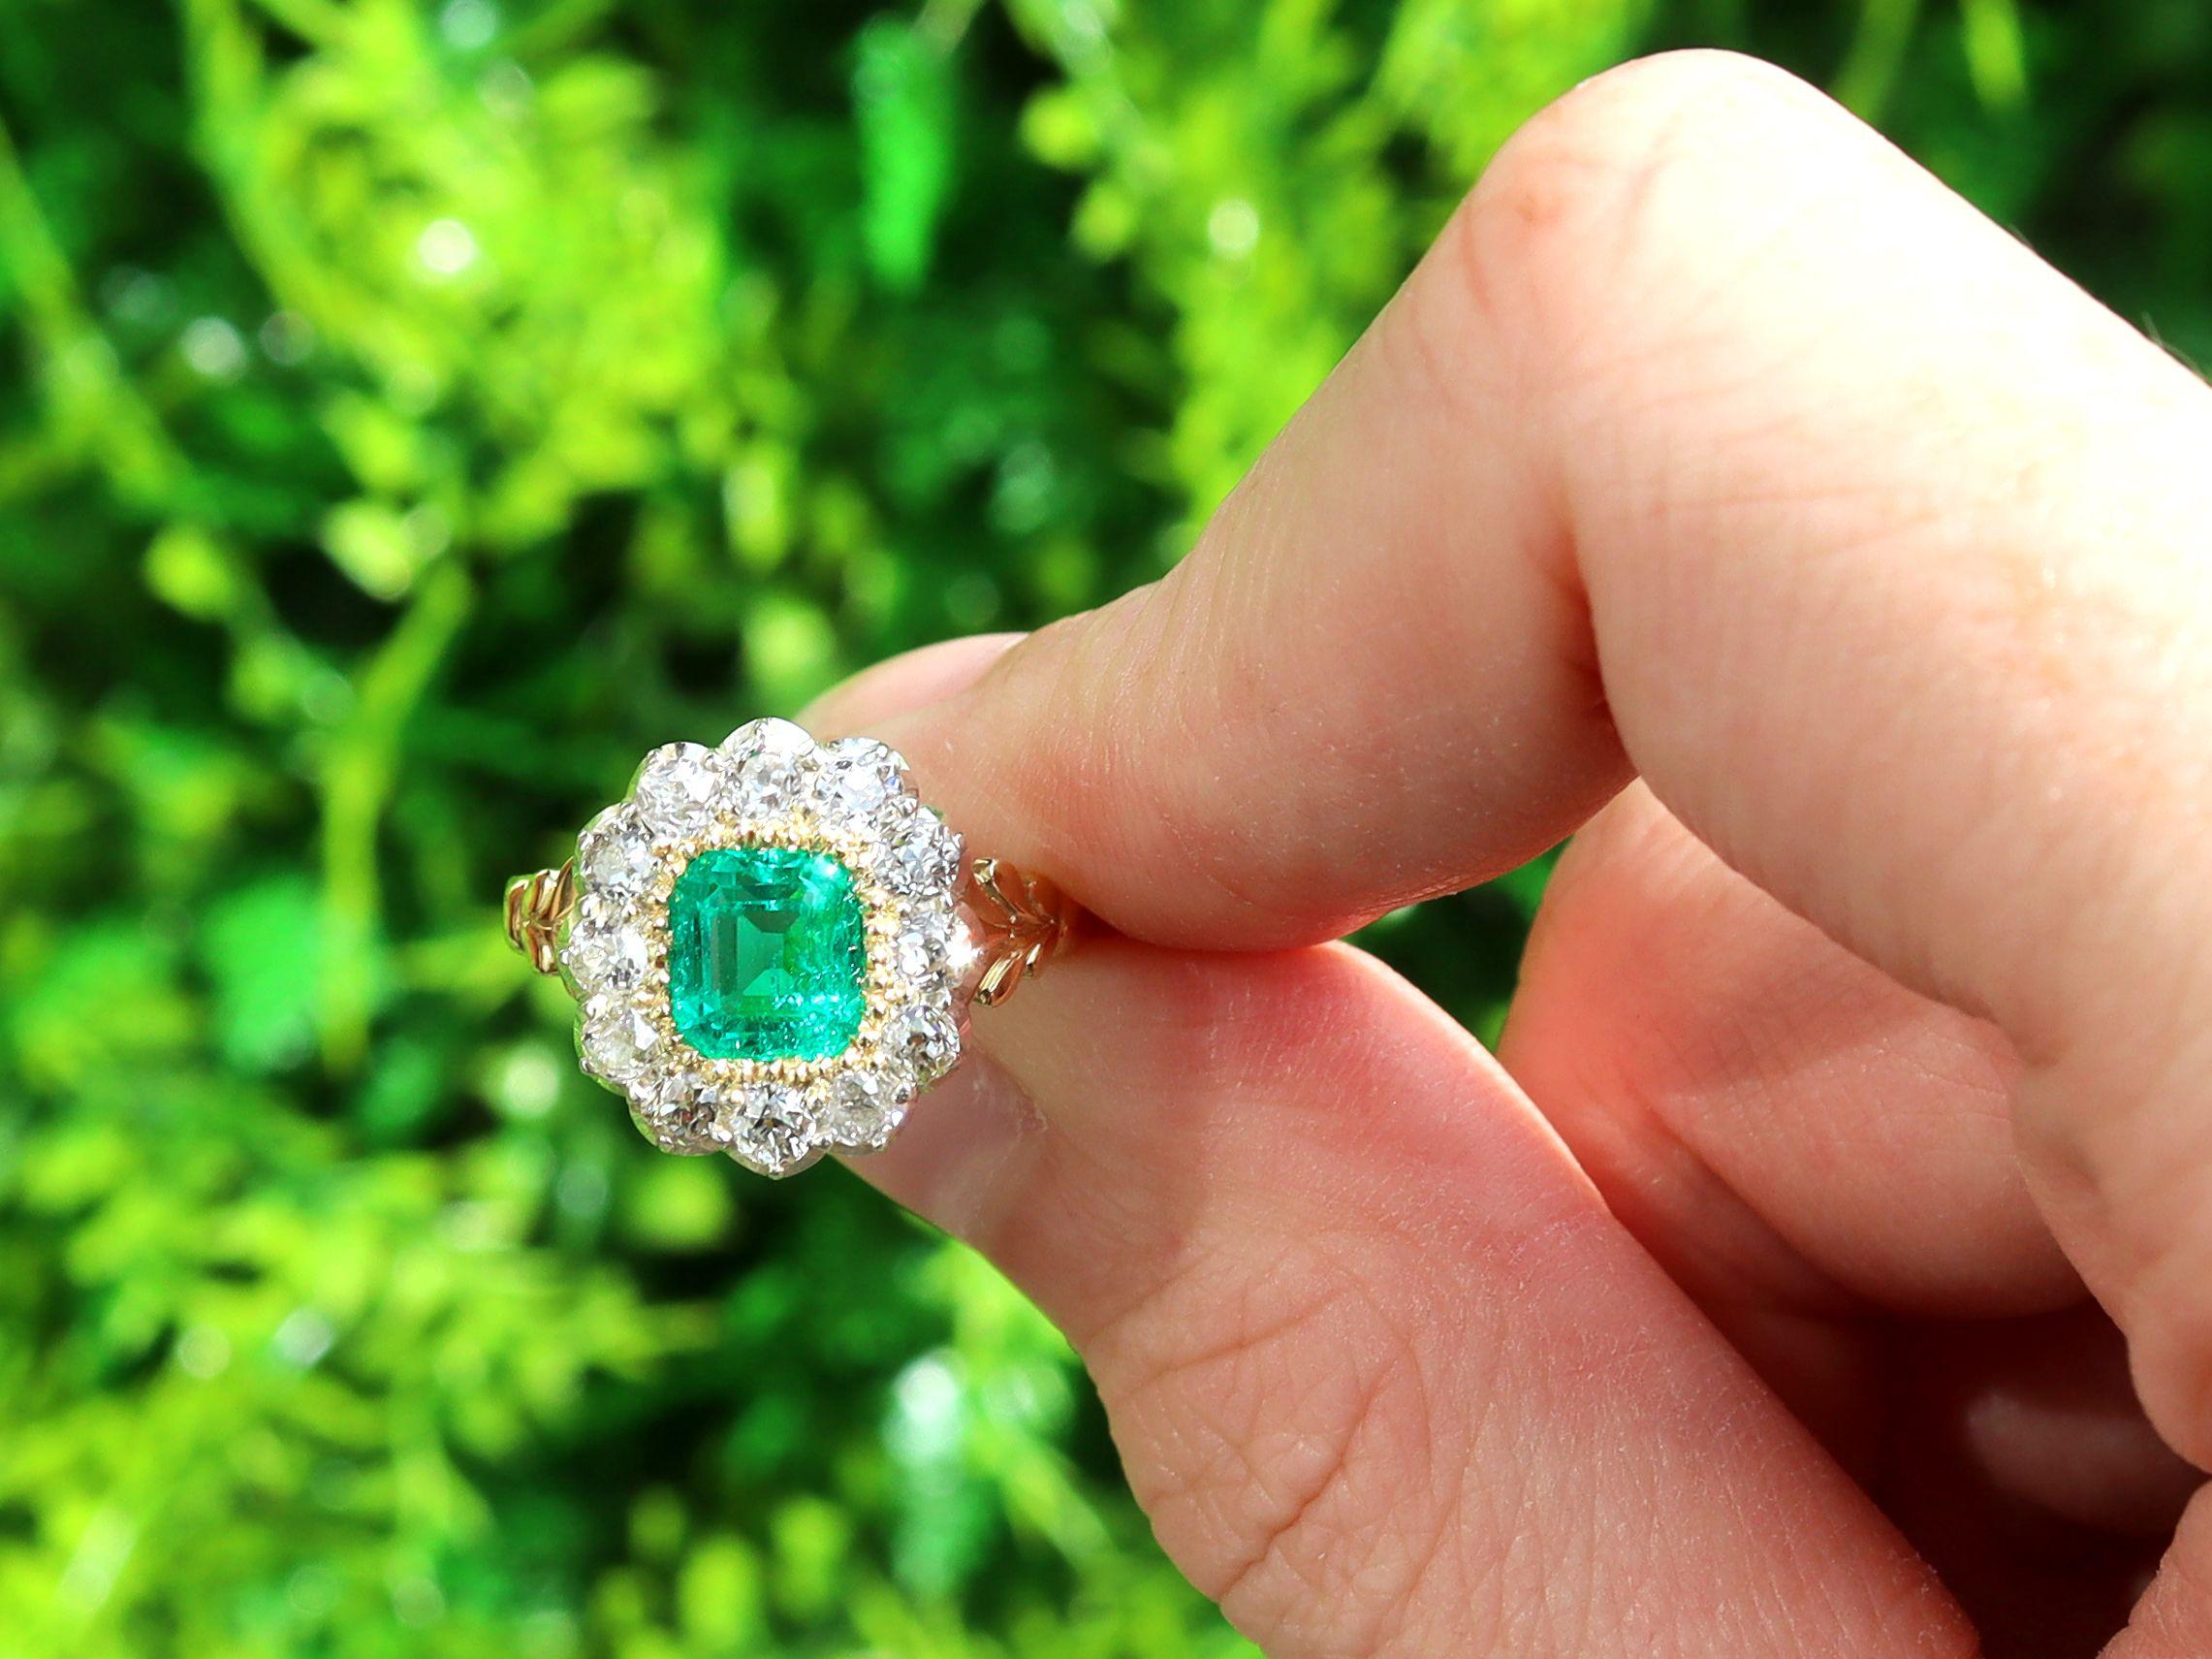 A stunning, fine and impressive 1.31 carat emerald and 0.98 carat diamond ring in 18 karat yellow gold; part of our antique emerald jewelry collections

This stunning, fine and impressive antique emerald and diamond ring has been crafted in 18k